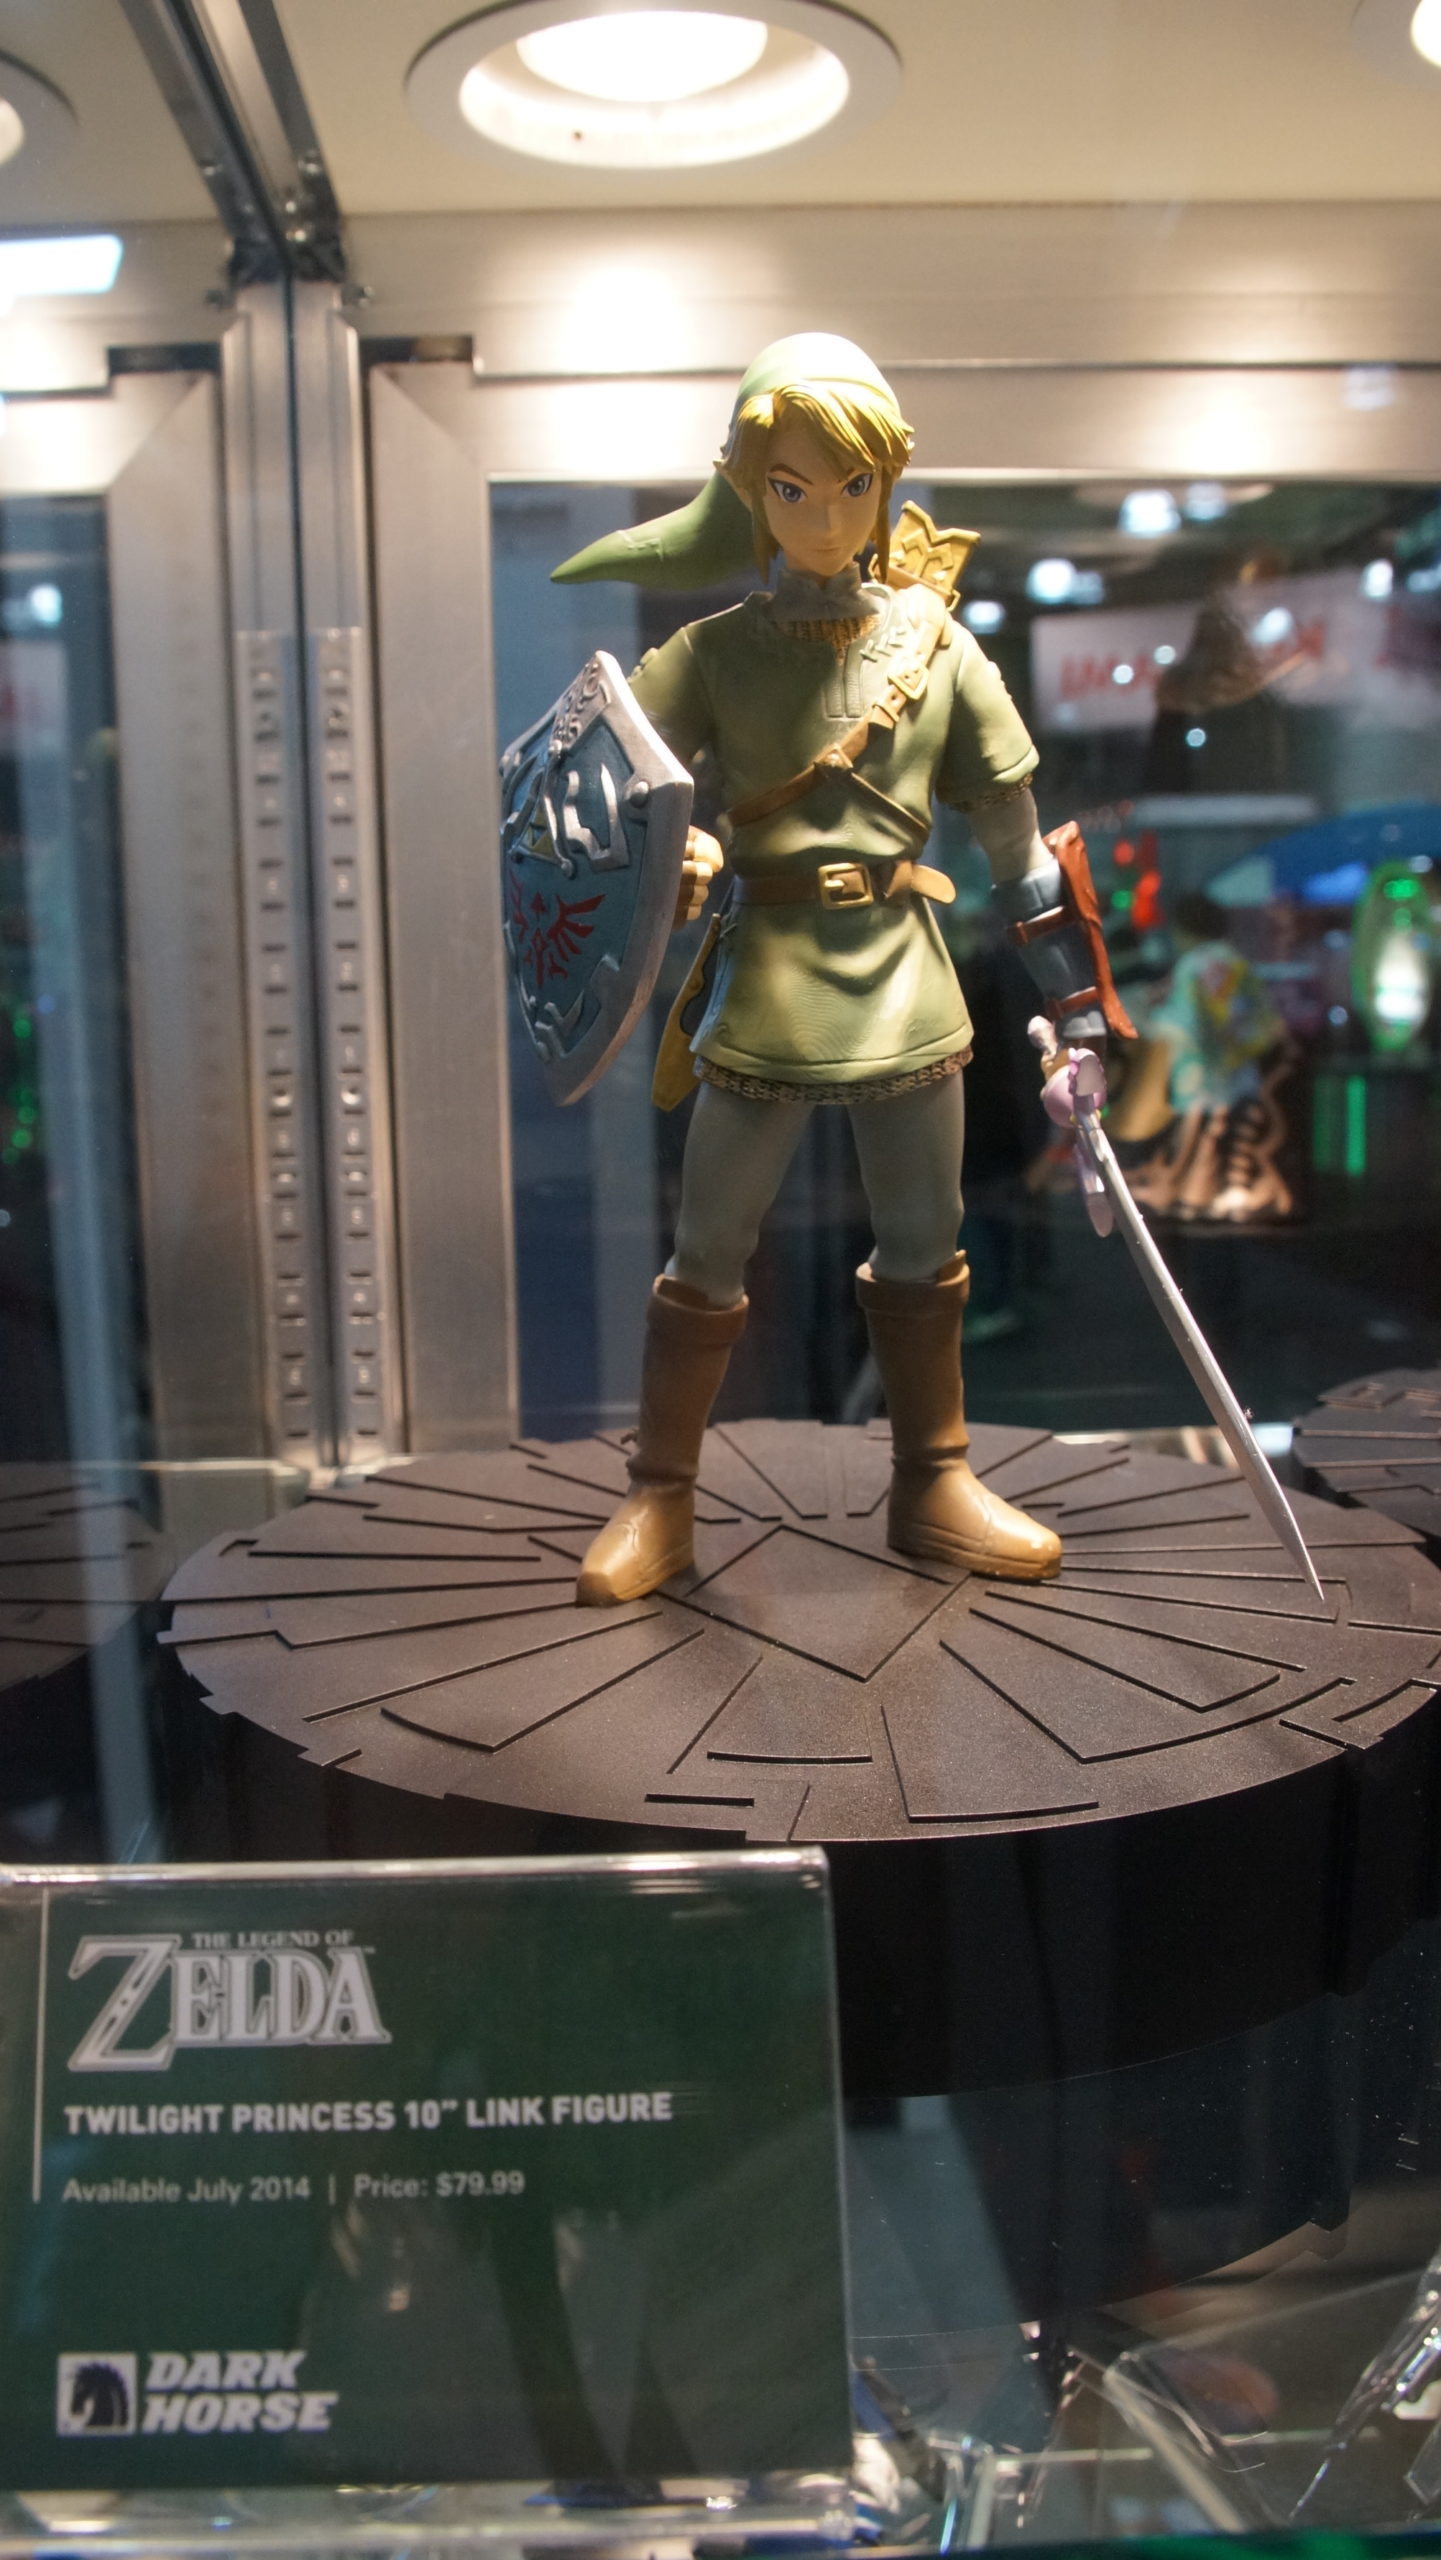 The Best Nintendo Stuff We Saw At Toy Fair